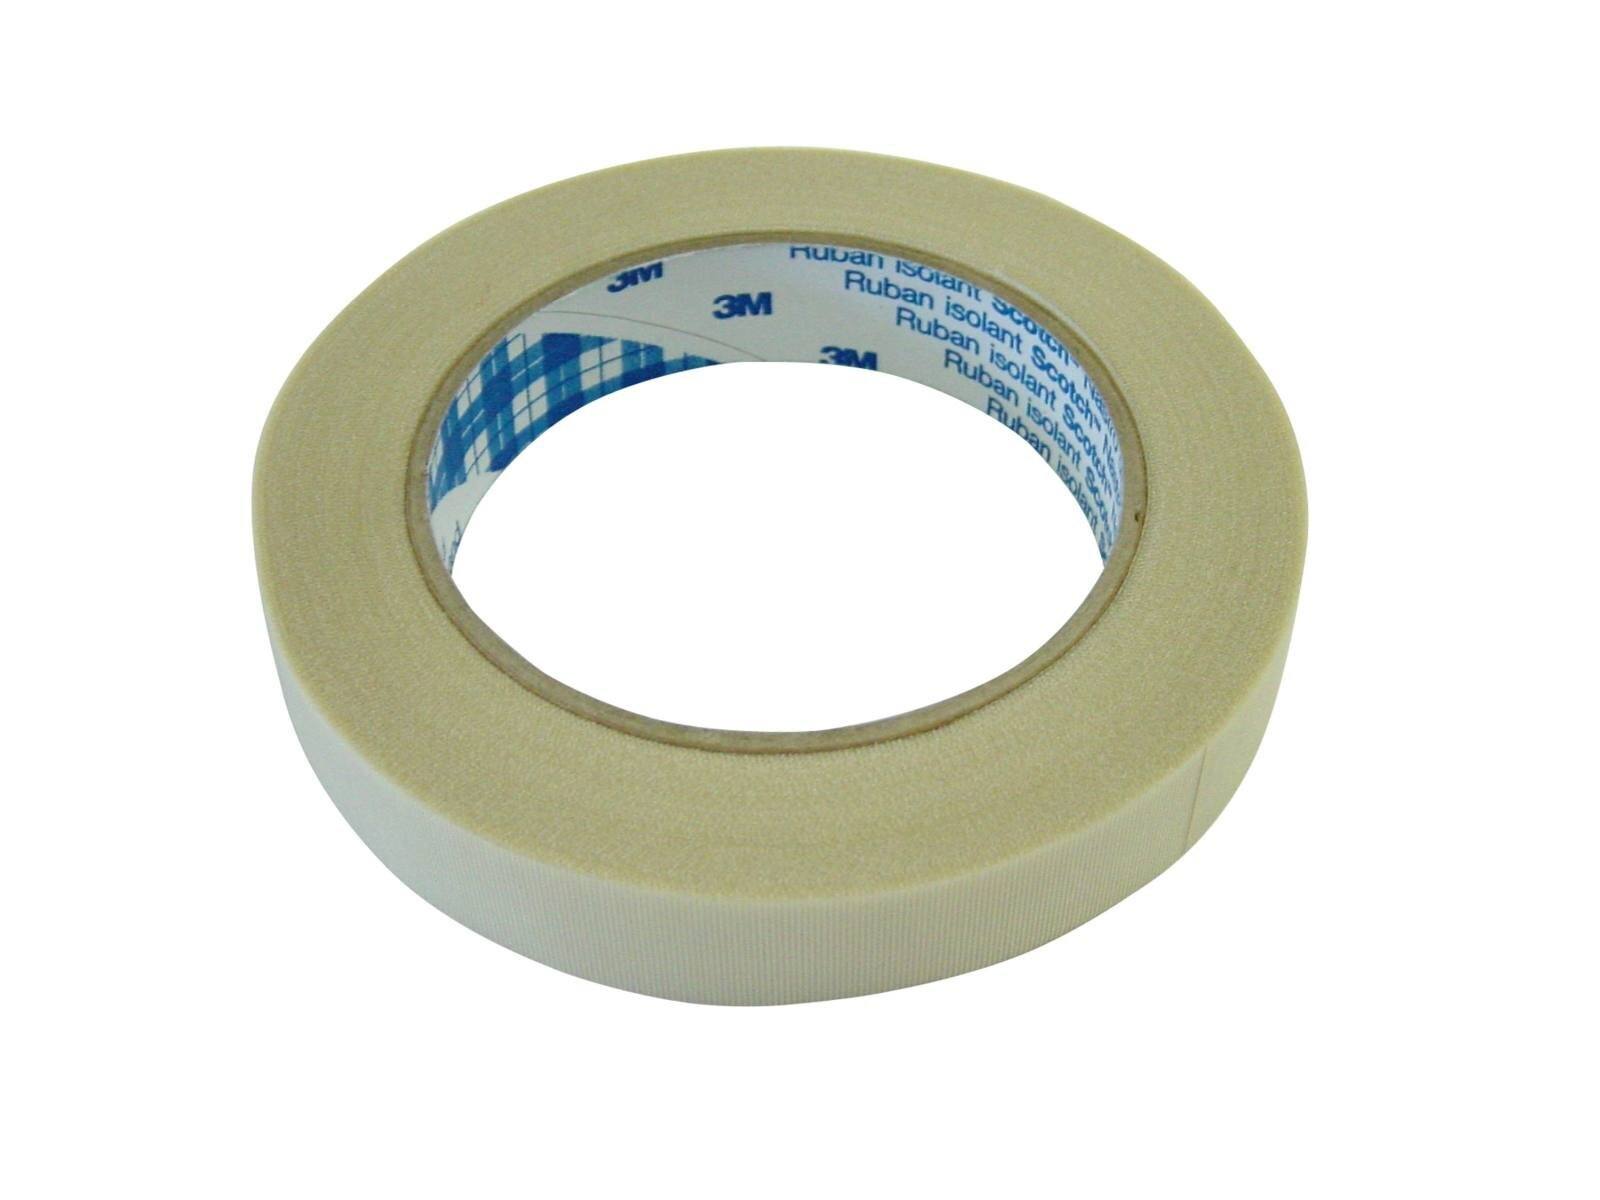 3M ET 69 Glasweefselband, wit, 25 mm x 33 m x 0,18 mm